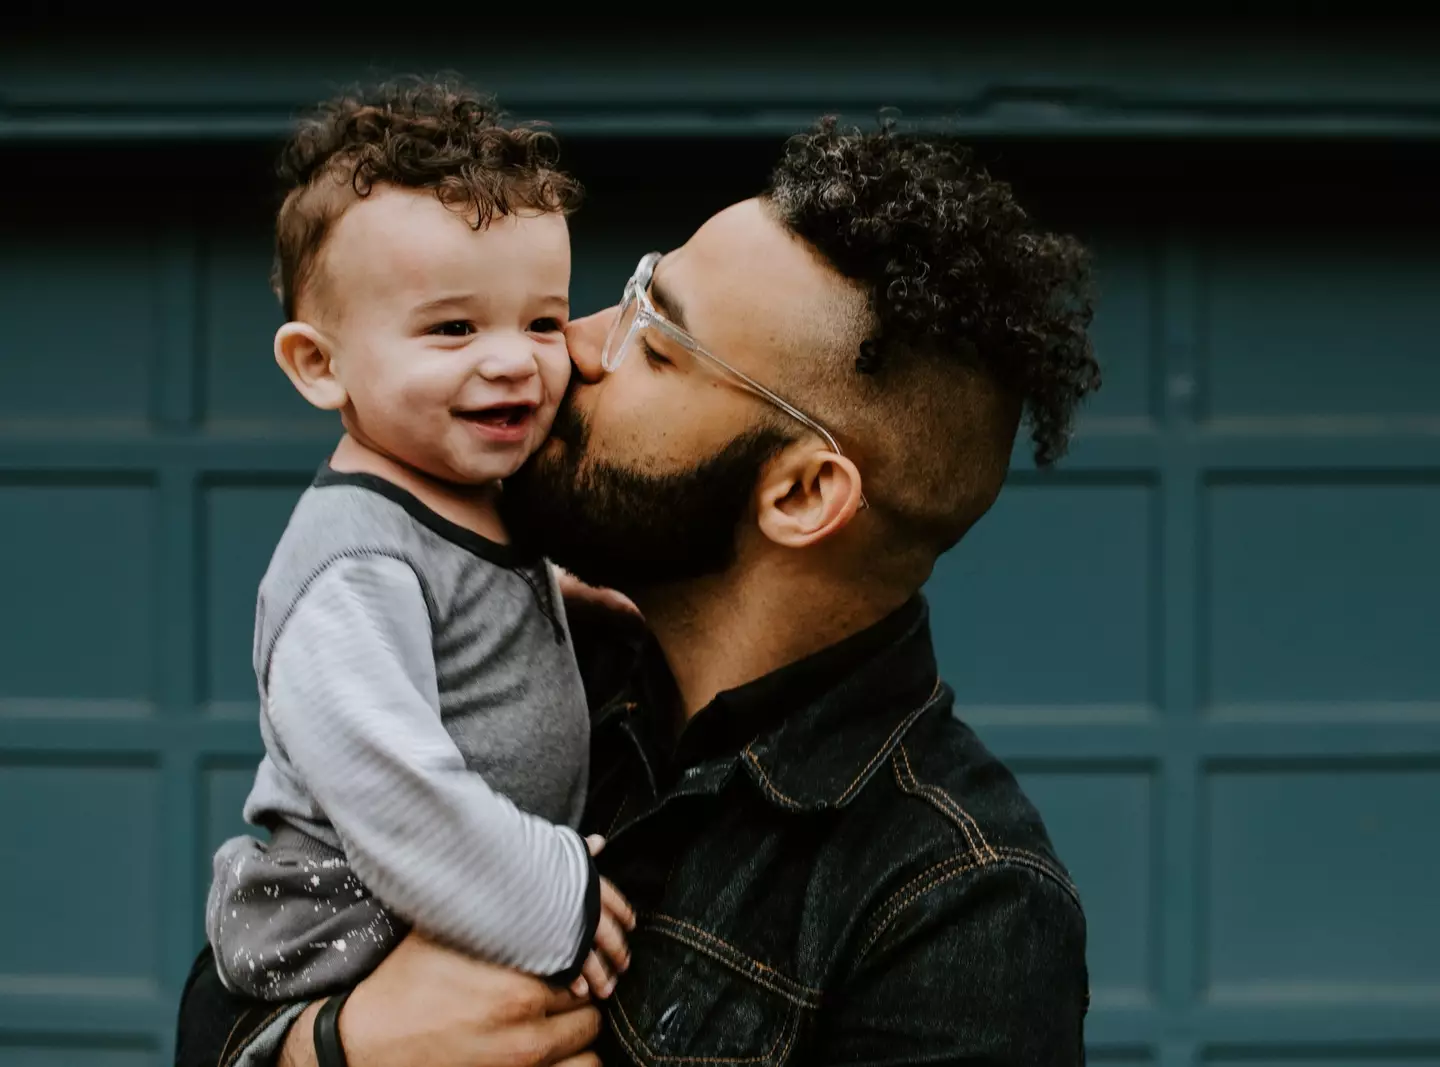 A father has called out ‘lazy’ parents who don’t spend time with their kids (Kelly Sikkema on Unsplash).